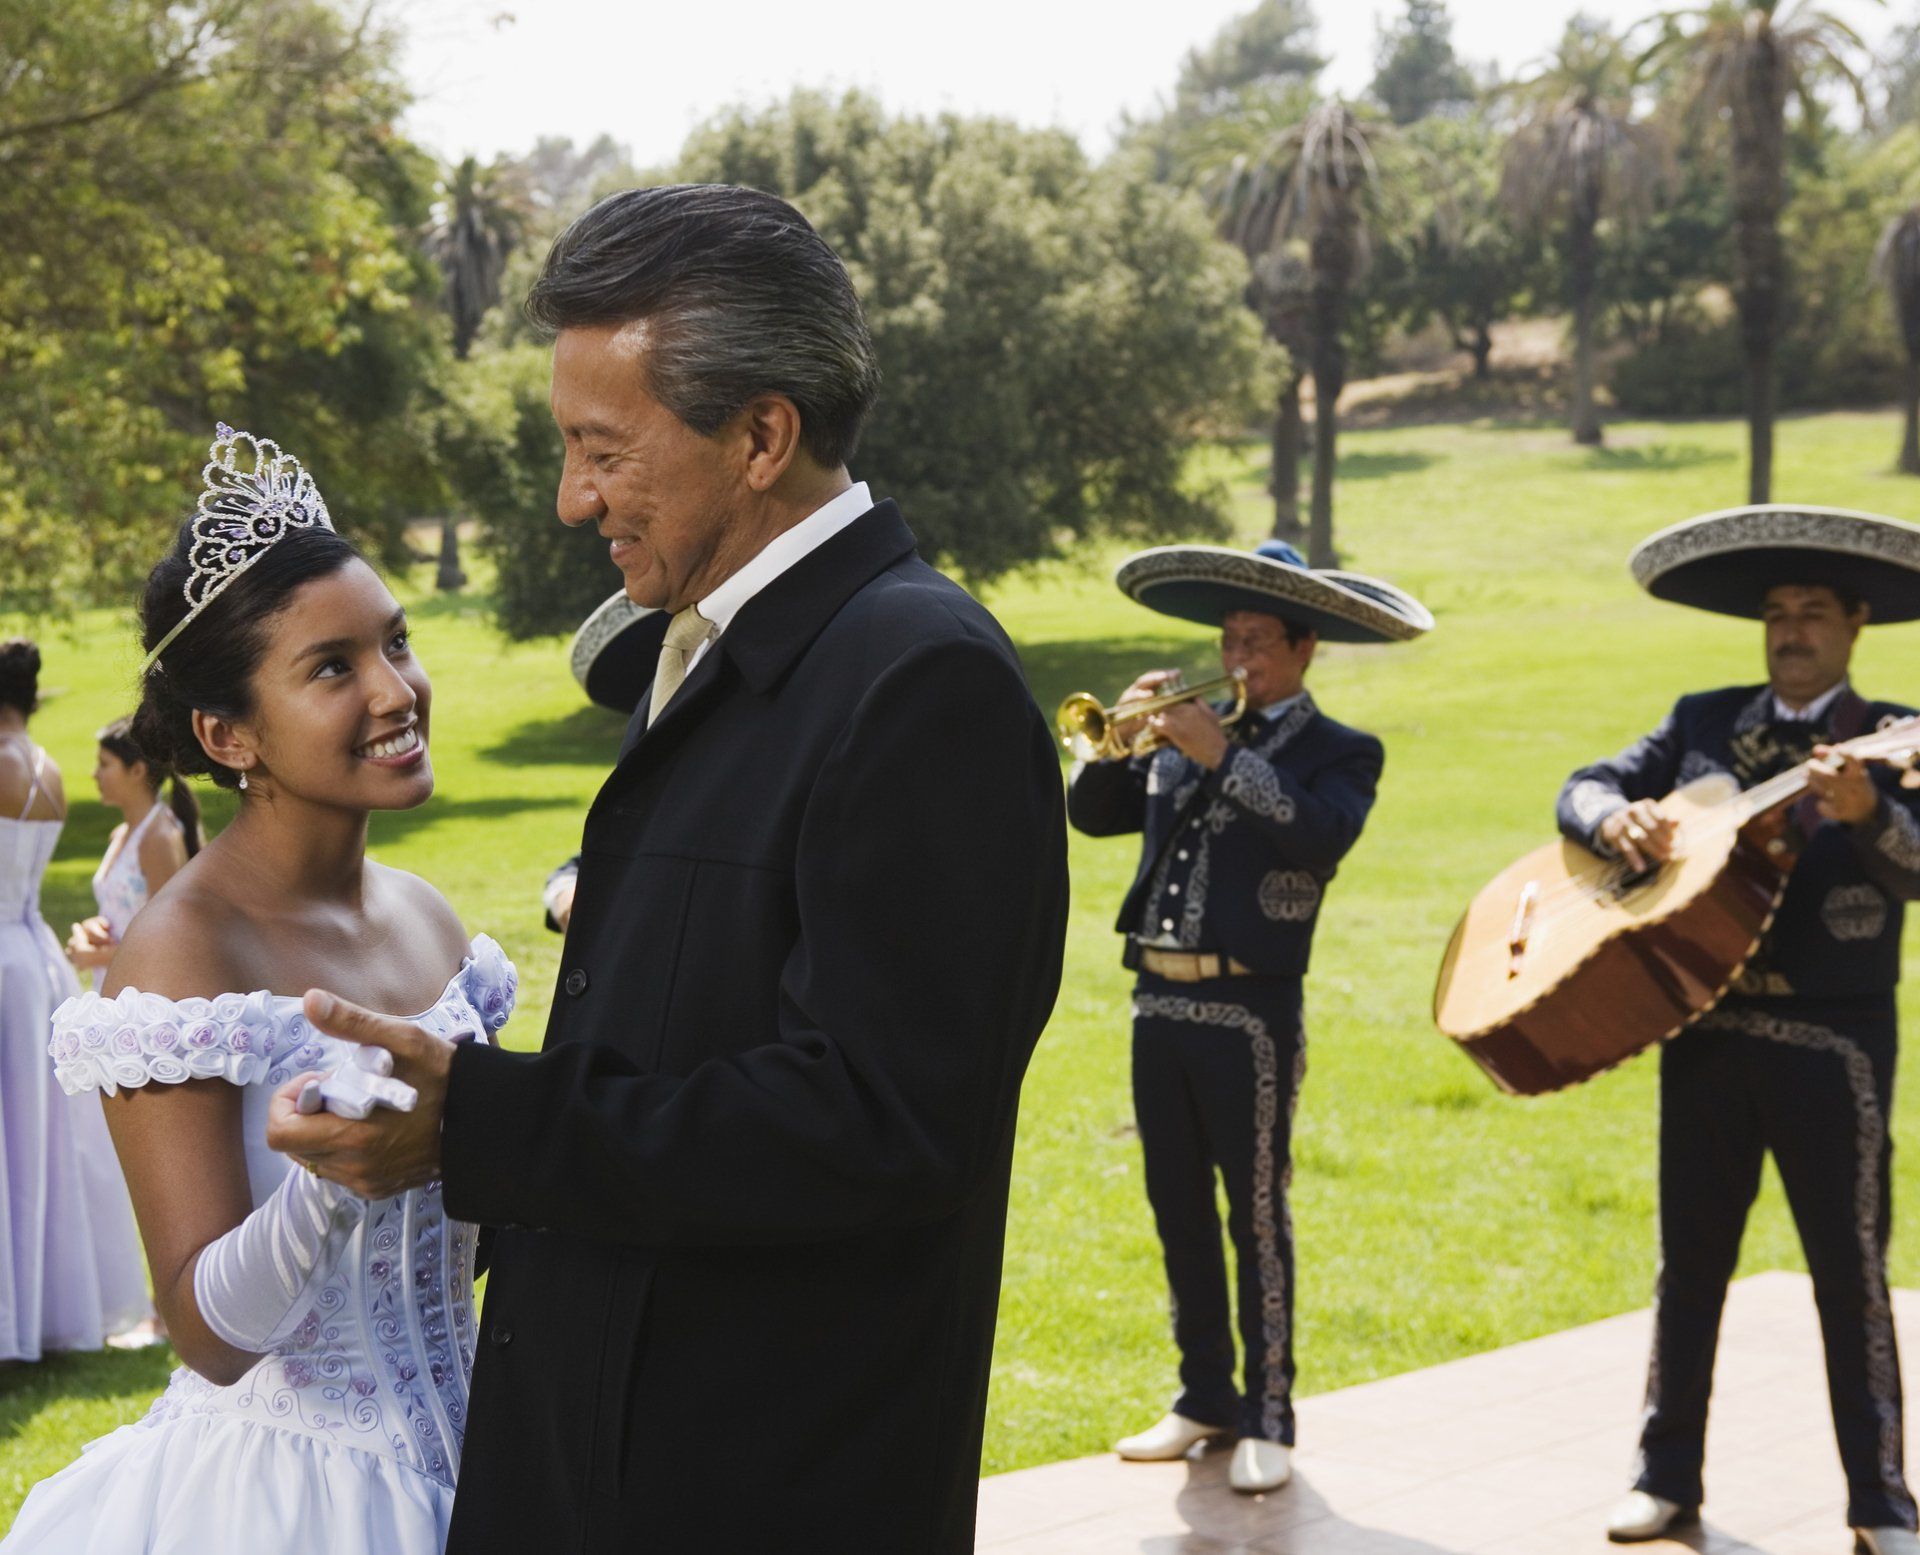 Grandfather and teenage girl dancing at quinceanera